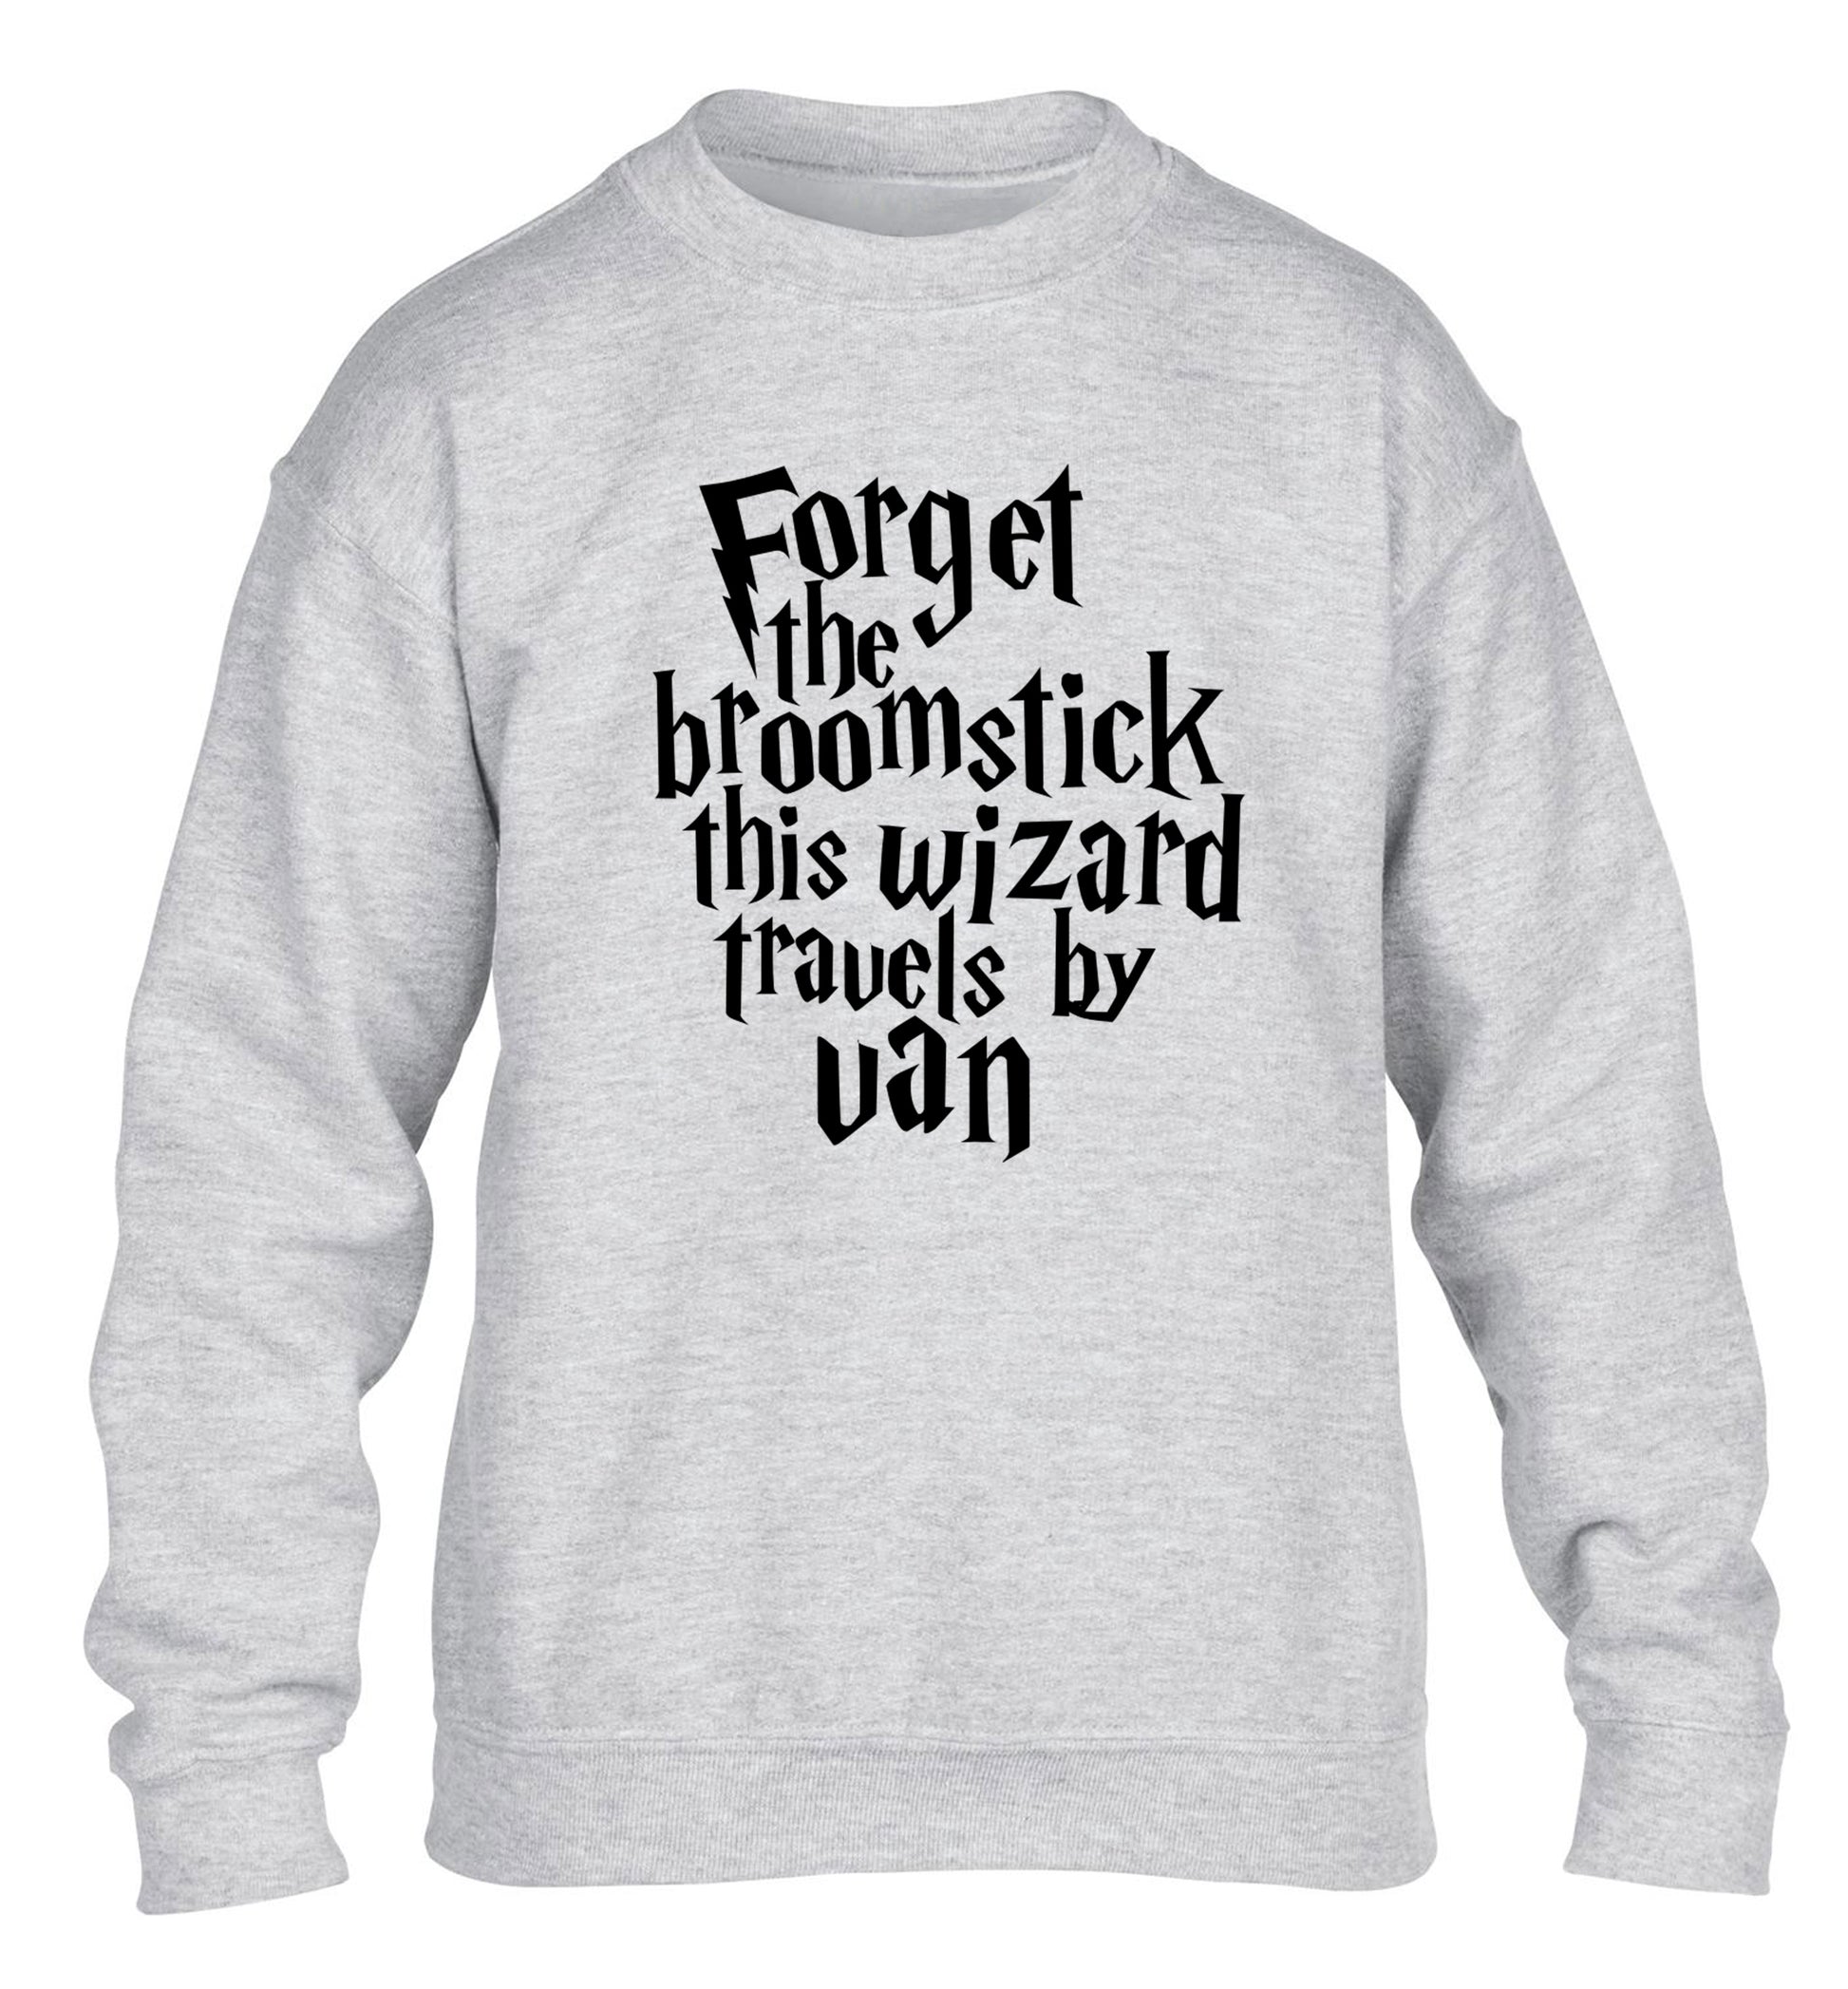 Forget the broomstick this wizard travels by van children's grey sweater 12-14 Years